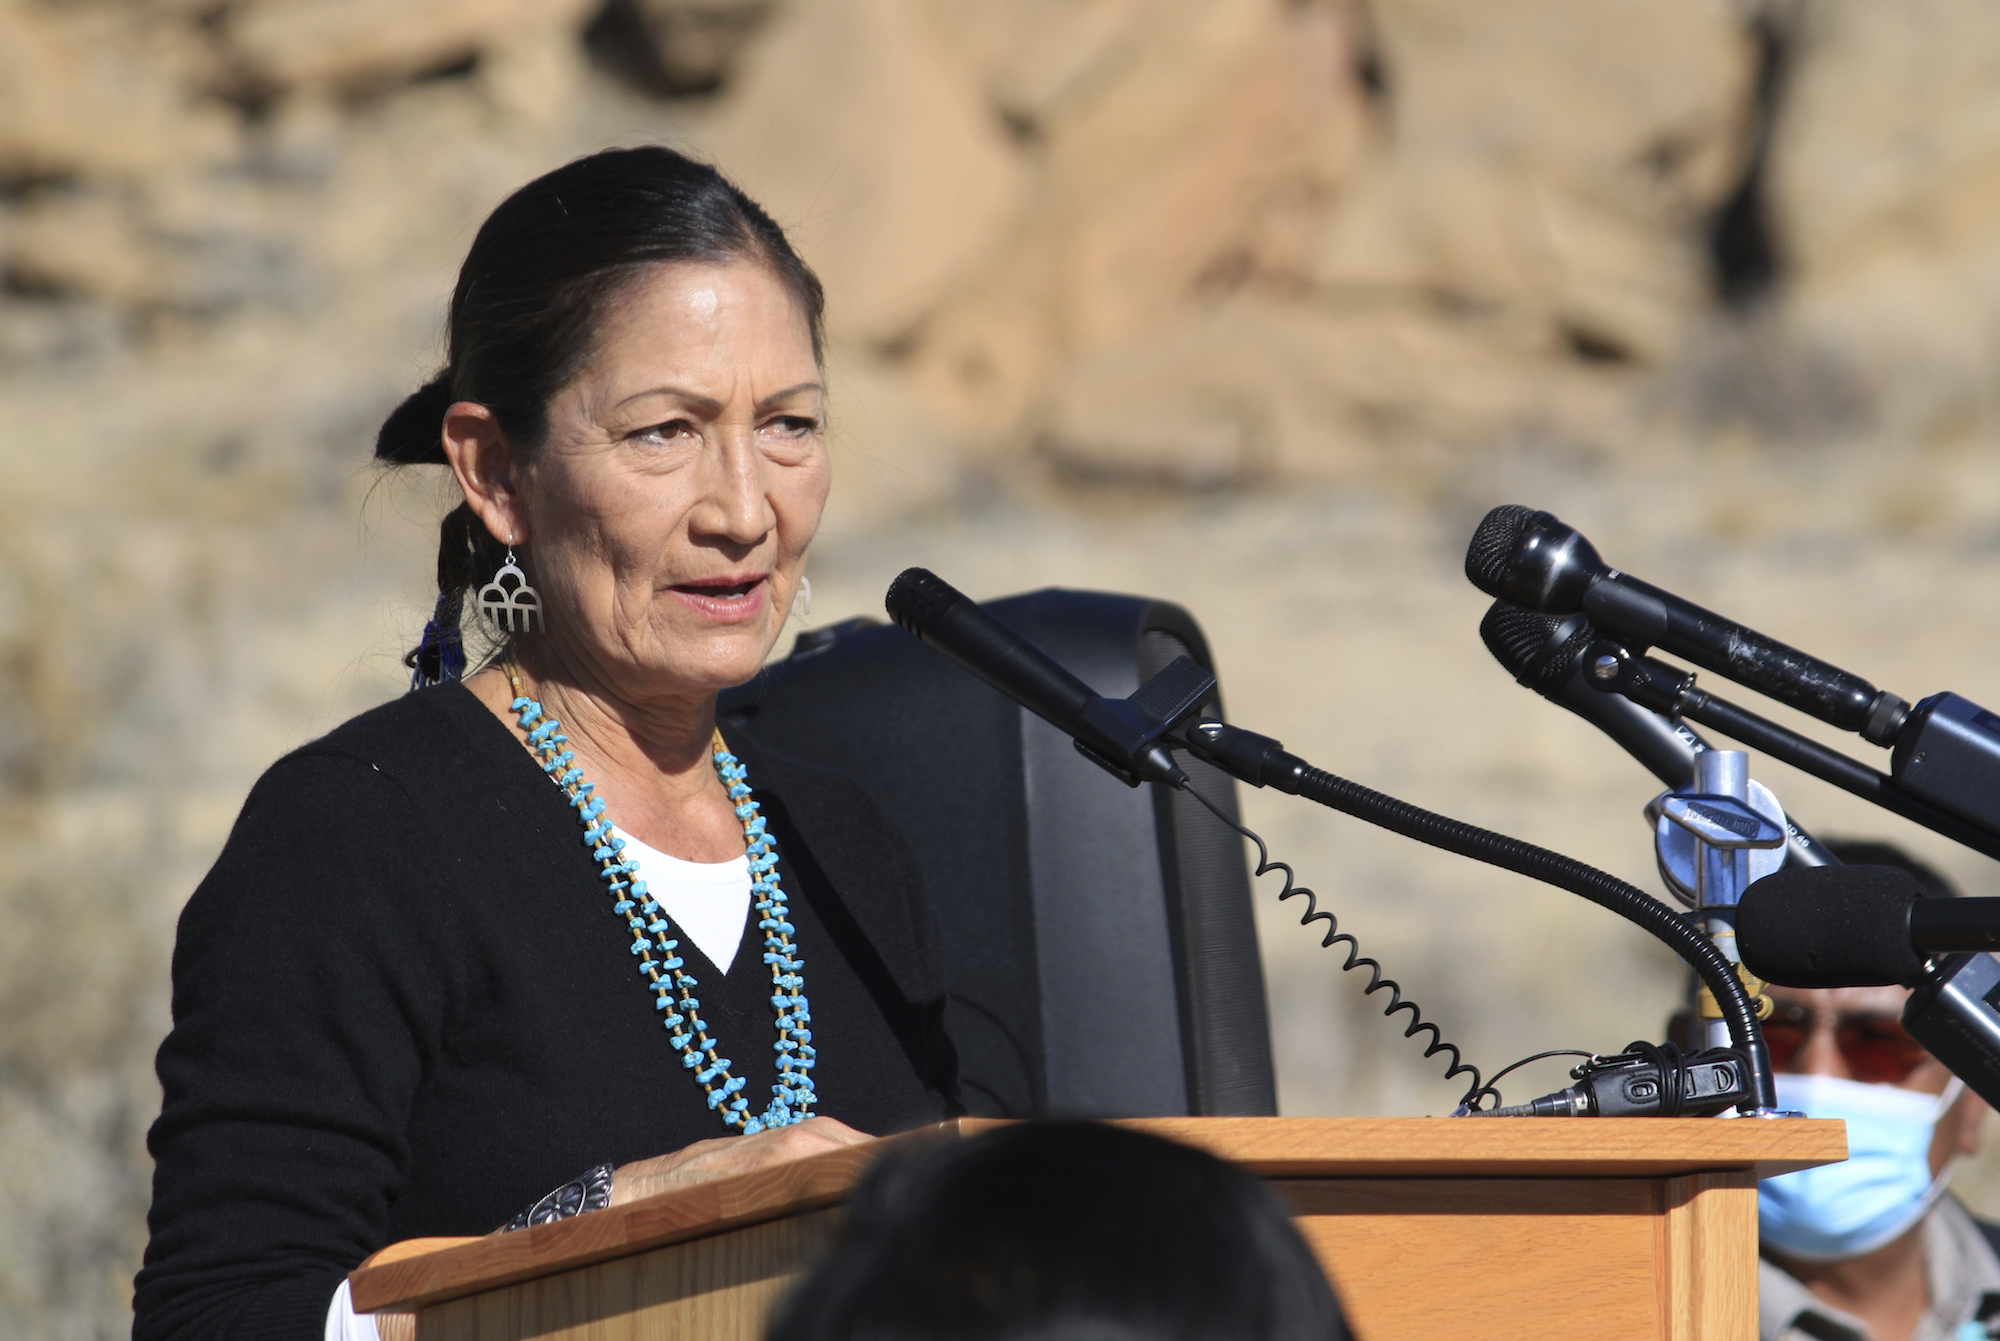 a woman with a blue necklace in front of a podium and a rock face behind her